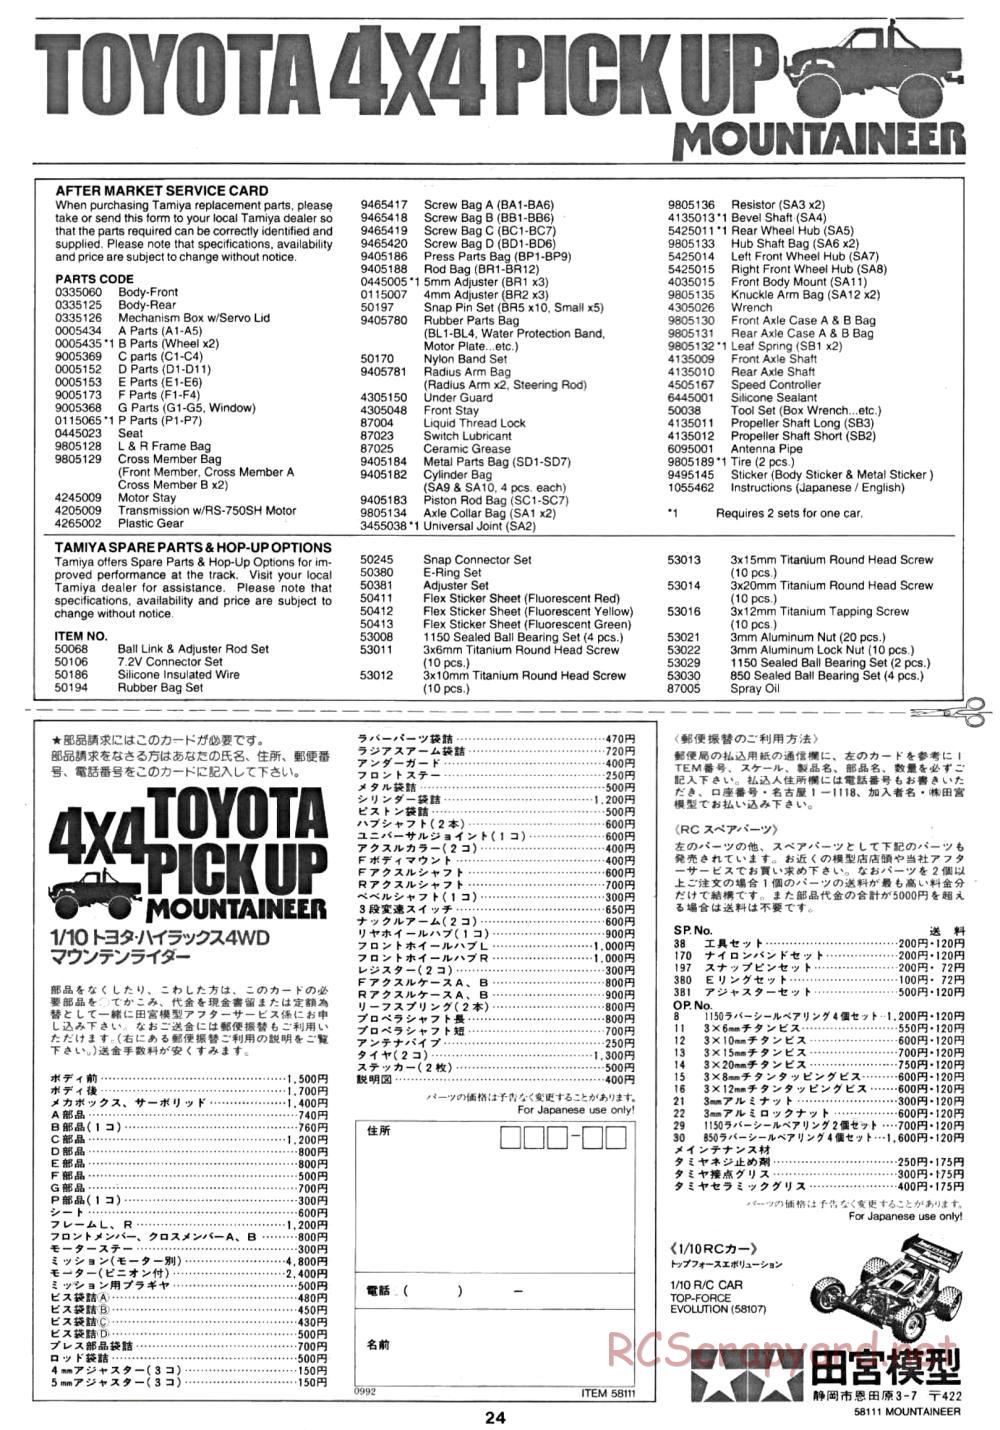 Tamiya - Toyota 4x4 Pick Up Mountaineer Chassis - Manual - Page 24